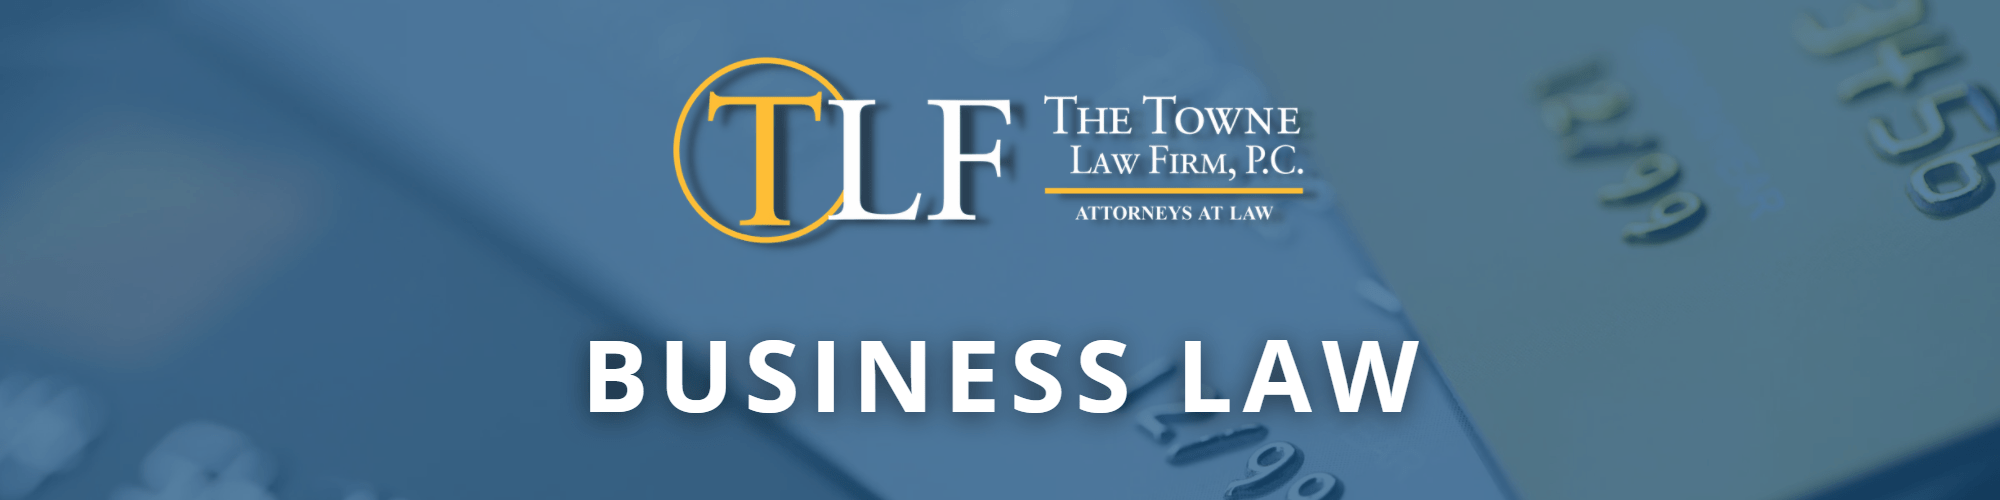 Credit card image with blue overlay, The Towne Law Firm logo business law Albany business lawyers